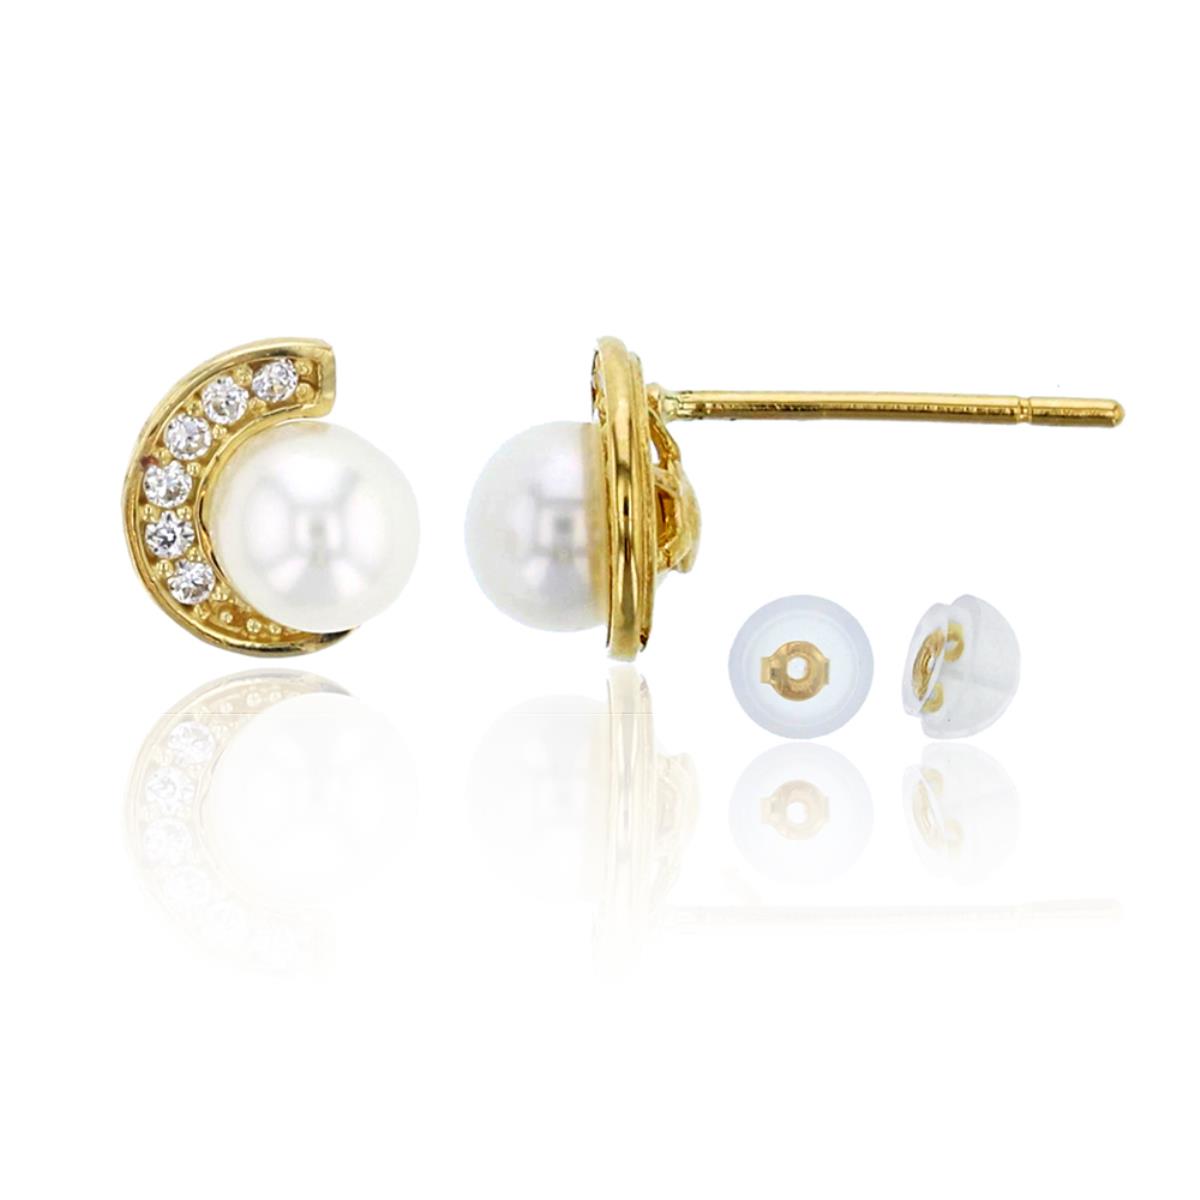 10K Yellow Gold Pave 4mm Fresh Water Pearl & CZ Moon Stud Earring & 10K Silicone Back